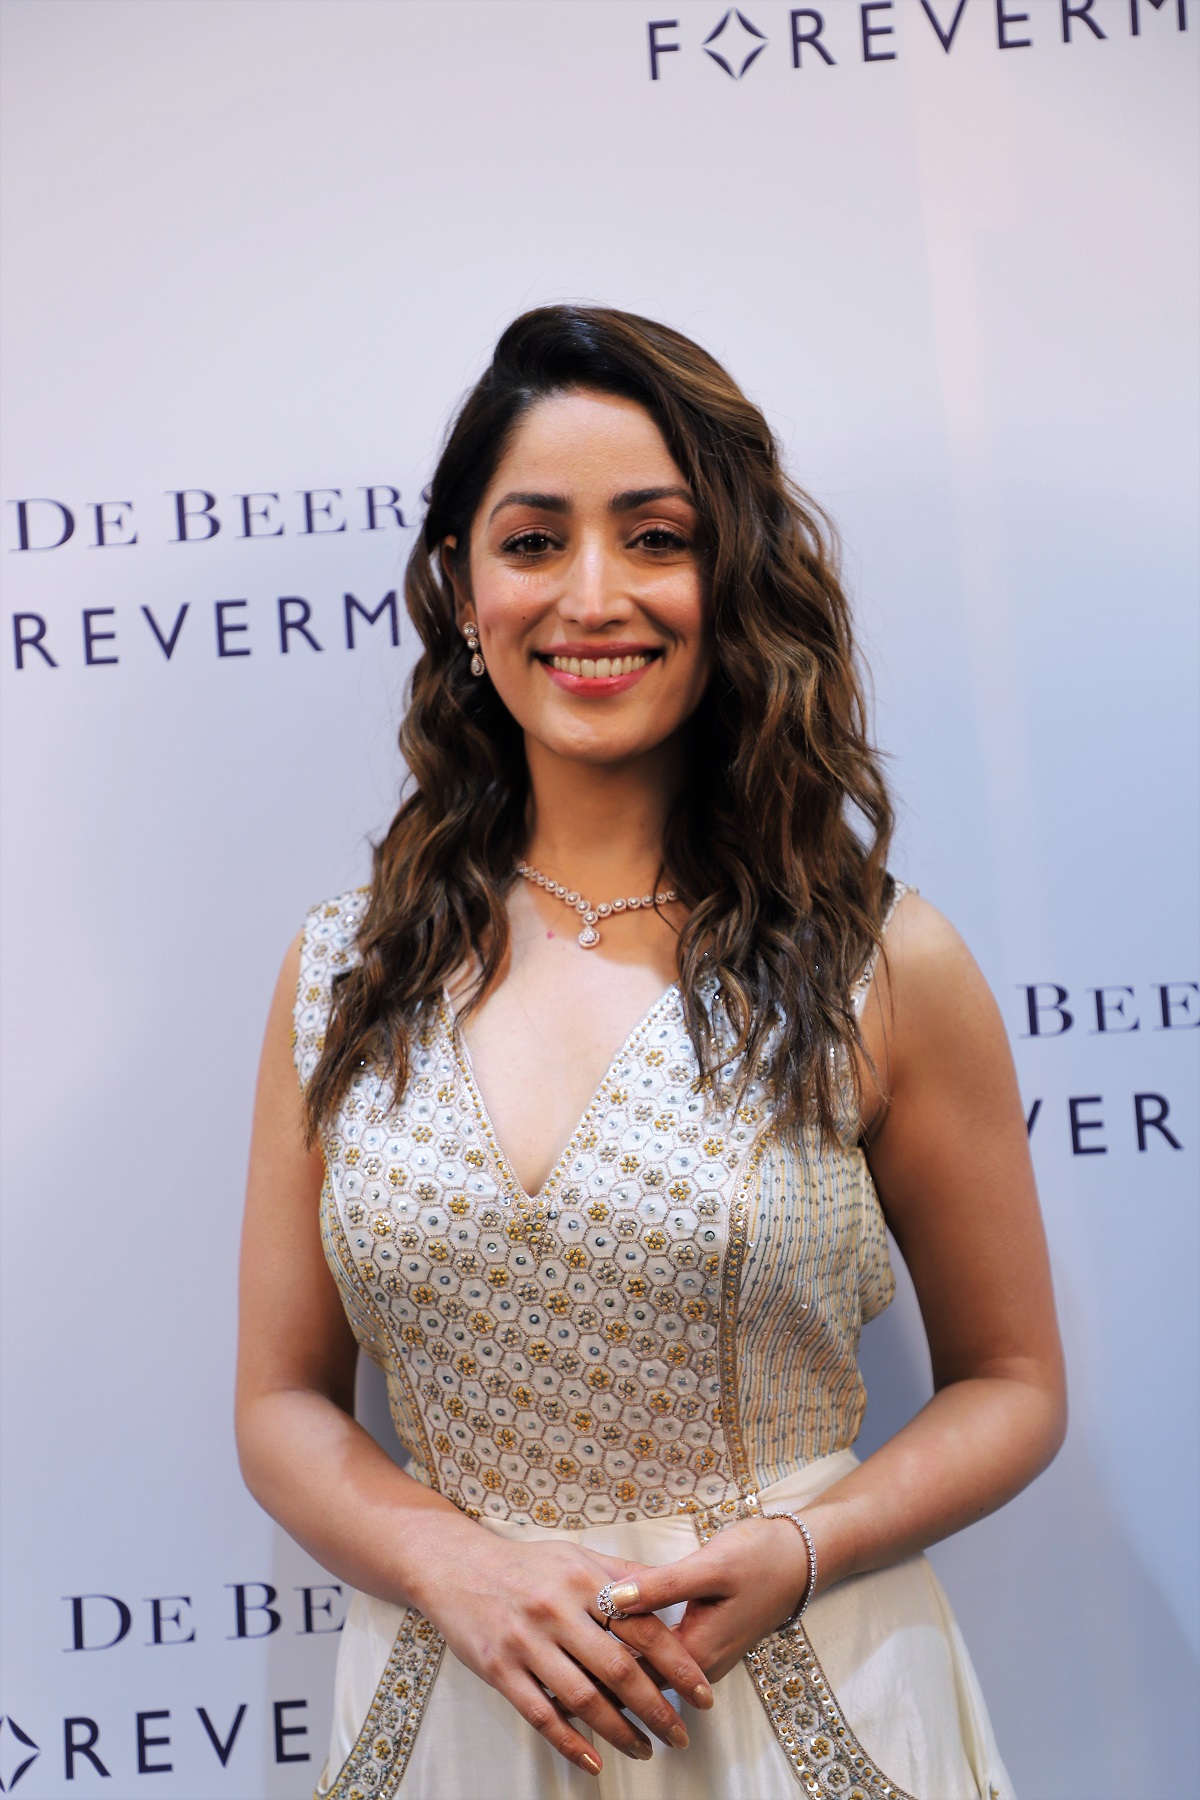 De Beers Forevermark Launches Its First Exclusive Boutique In Lucknow